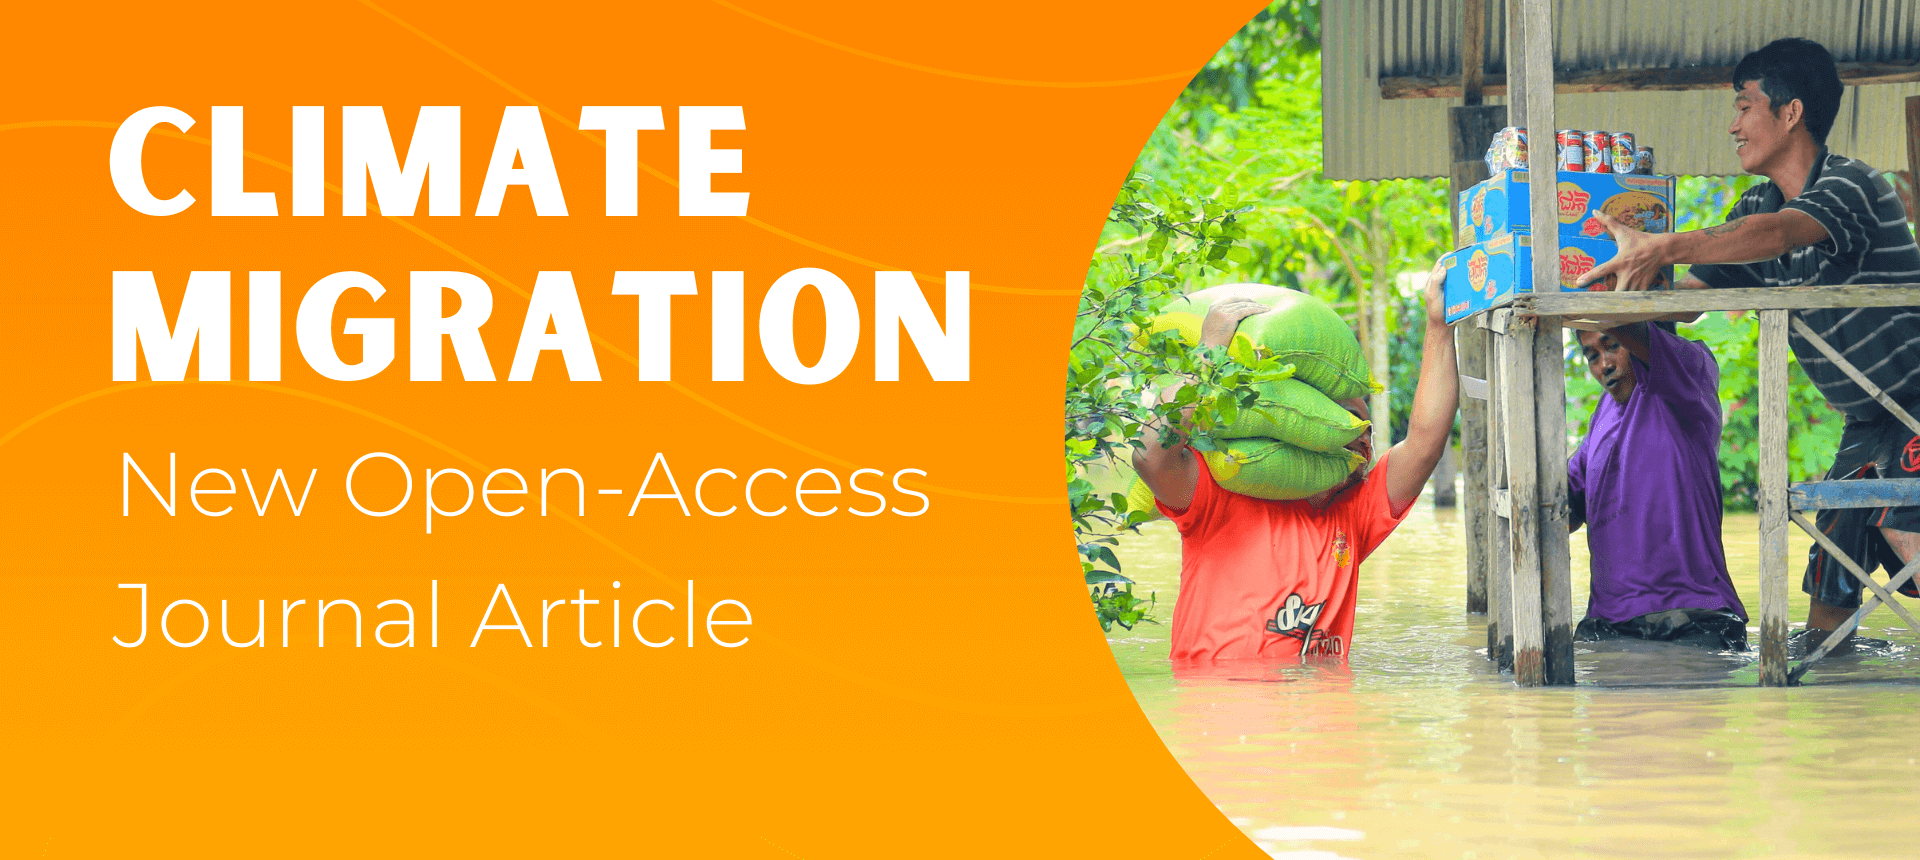 Climate Migration New Open-Access Journal Article